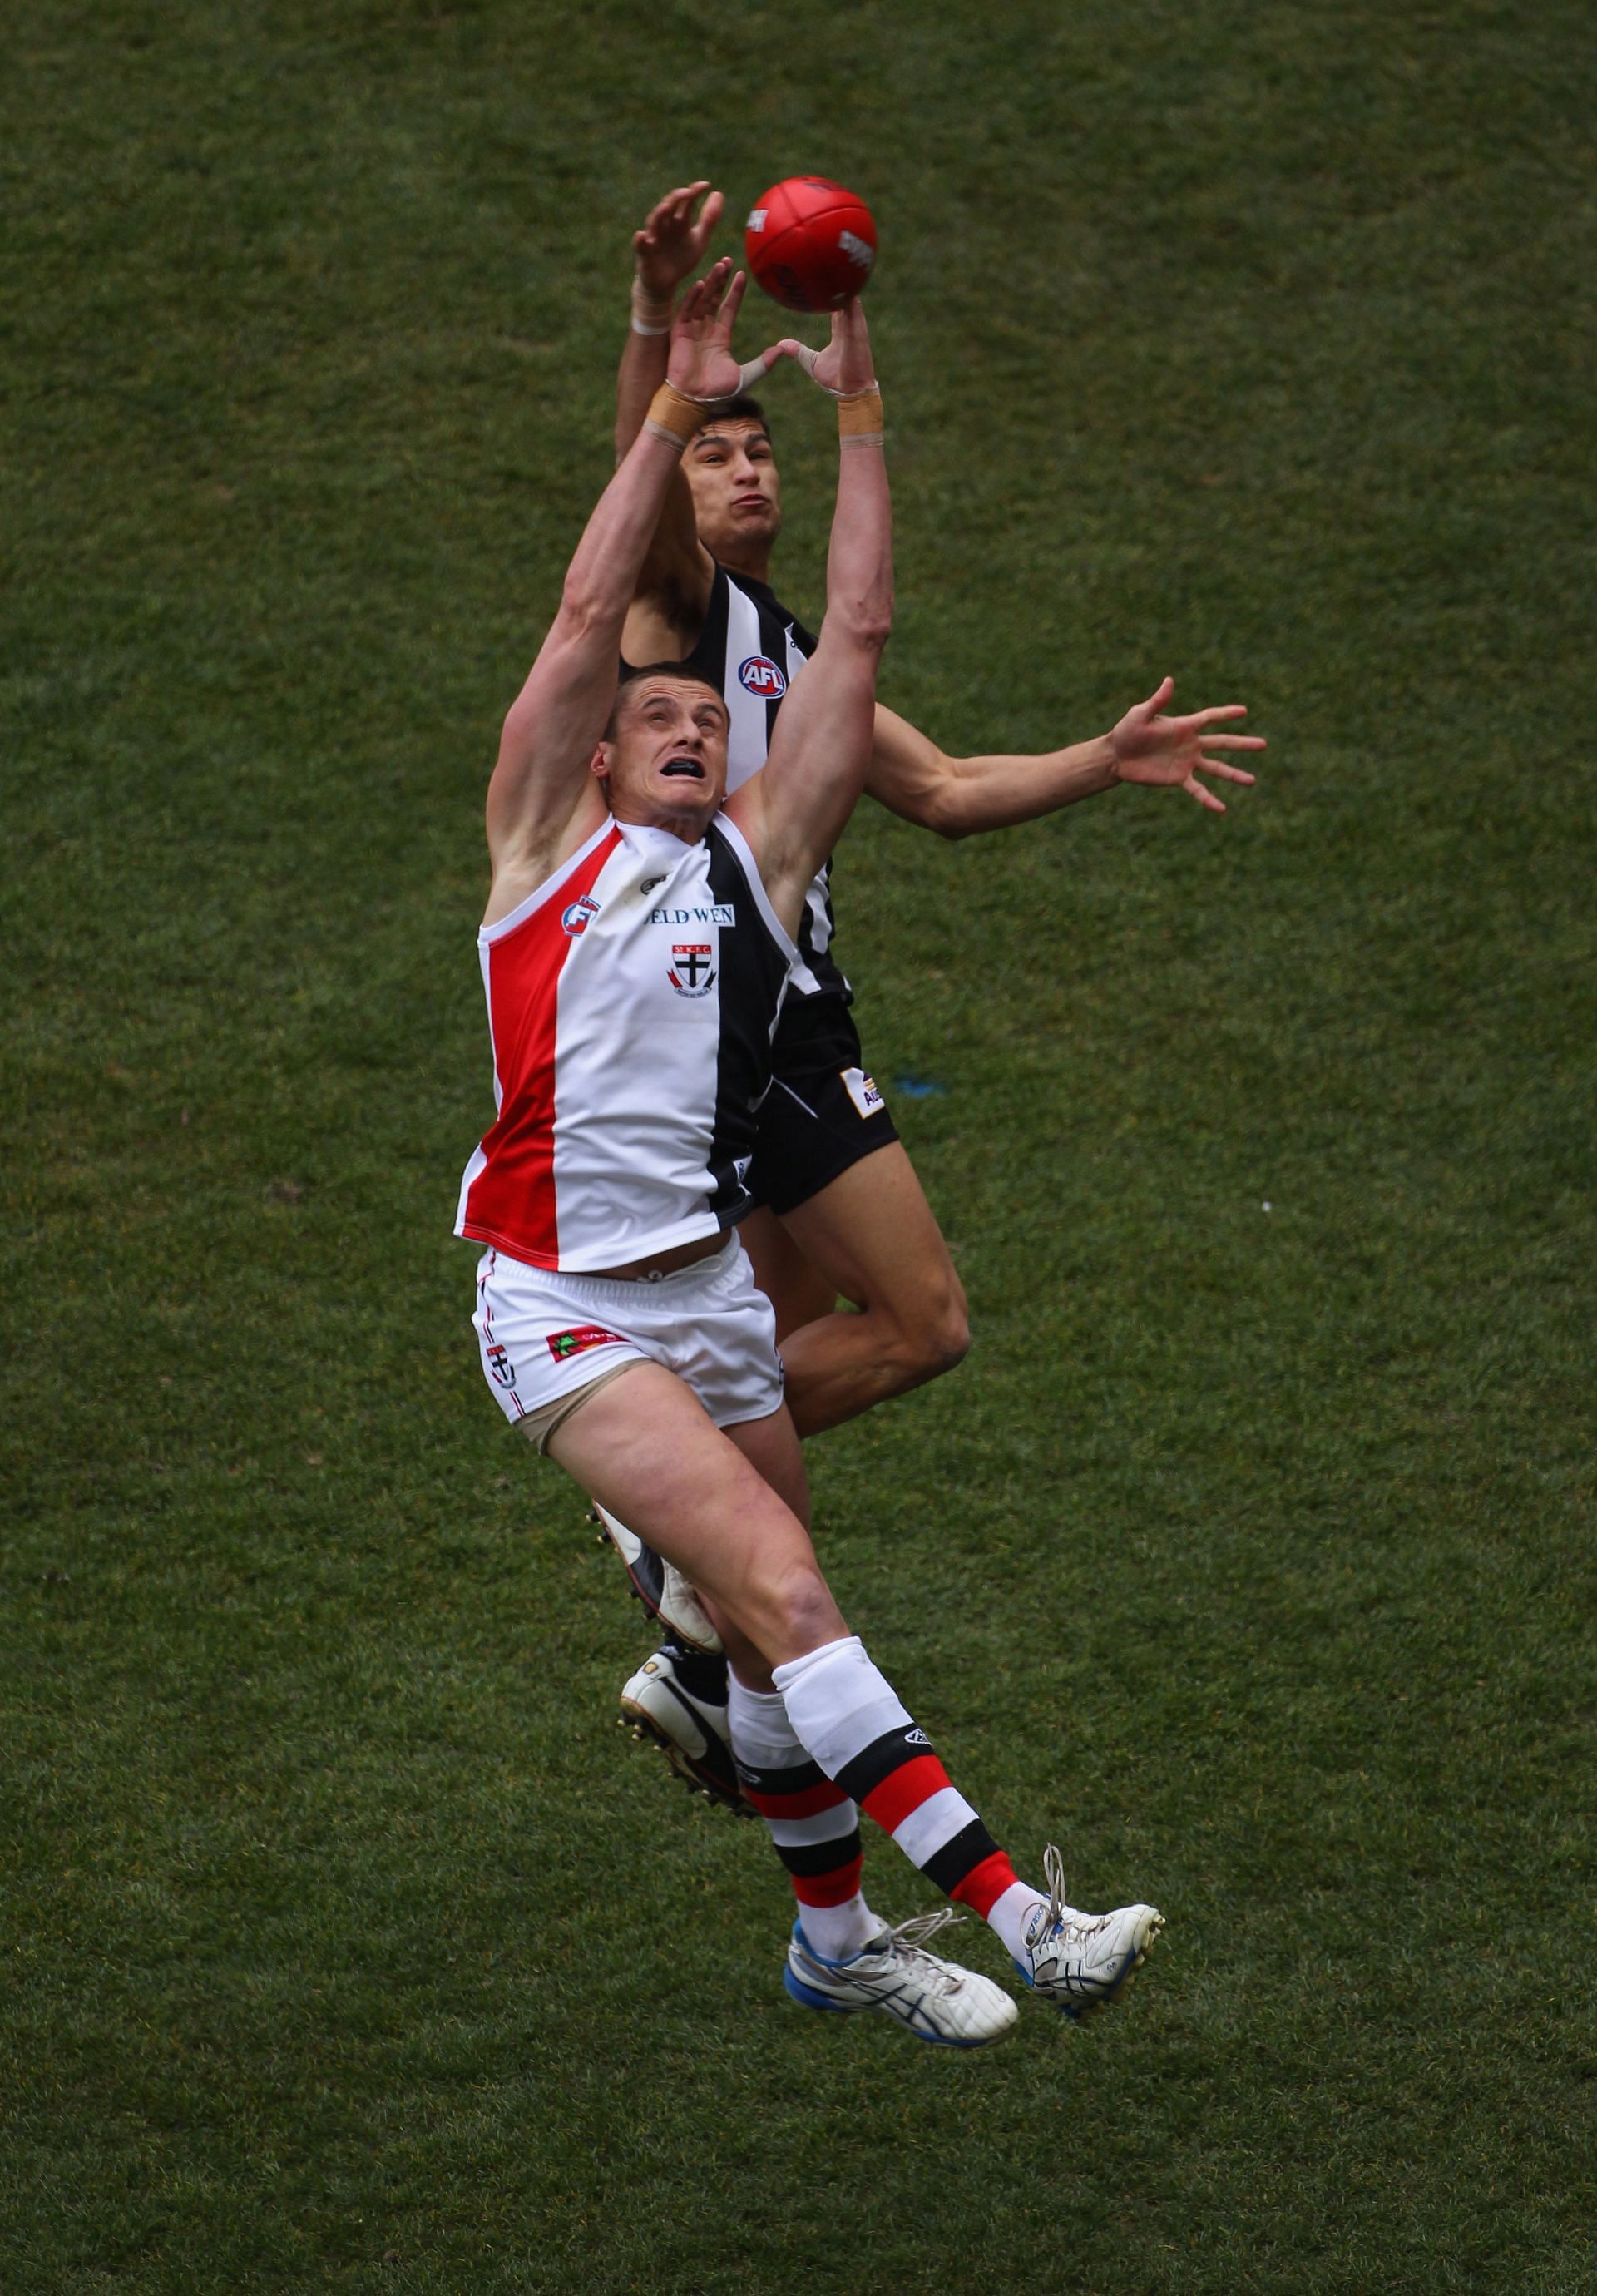 Michael Gardiner of the Saints gets the ball ahead of Sharrod Wellingham of the Magpies